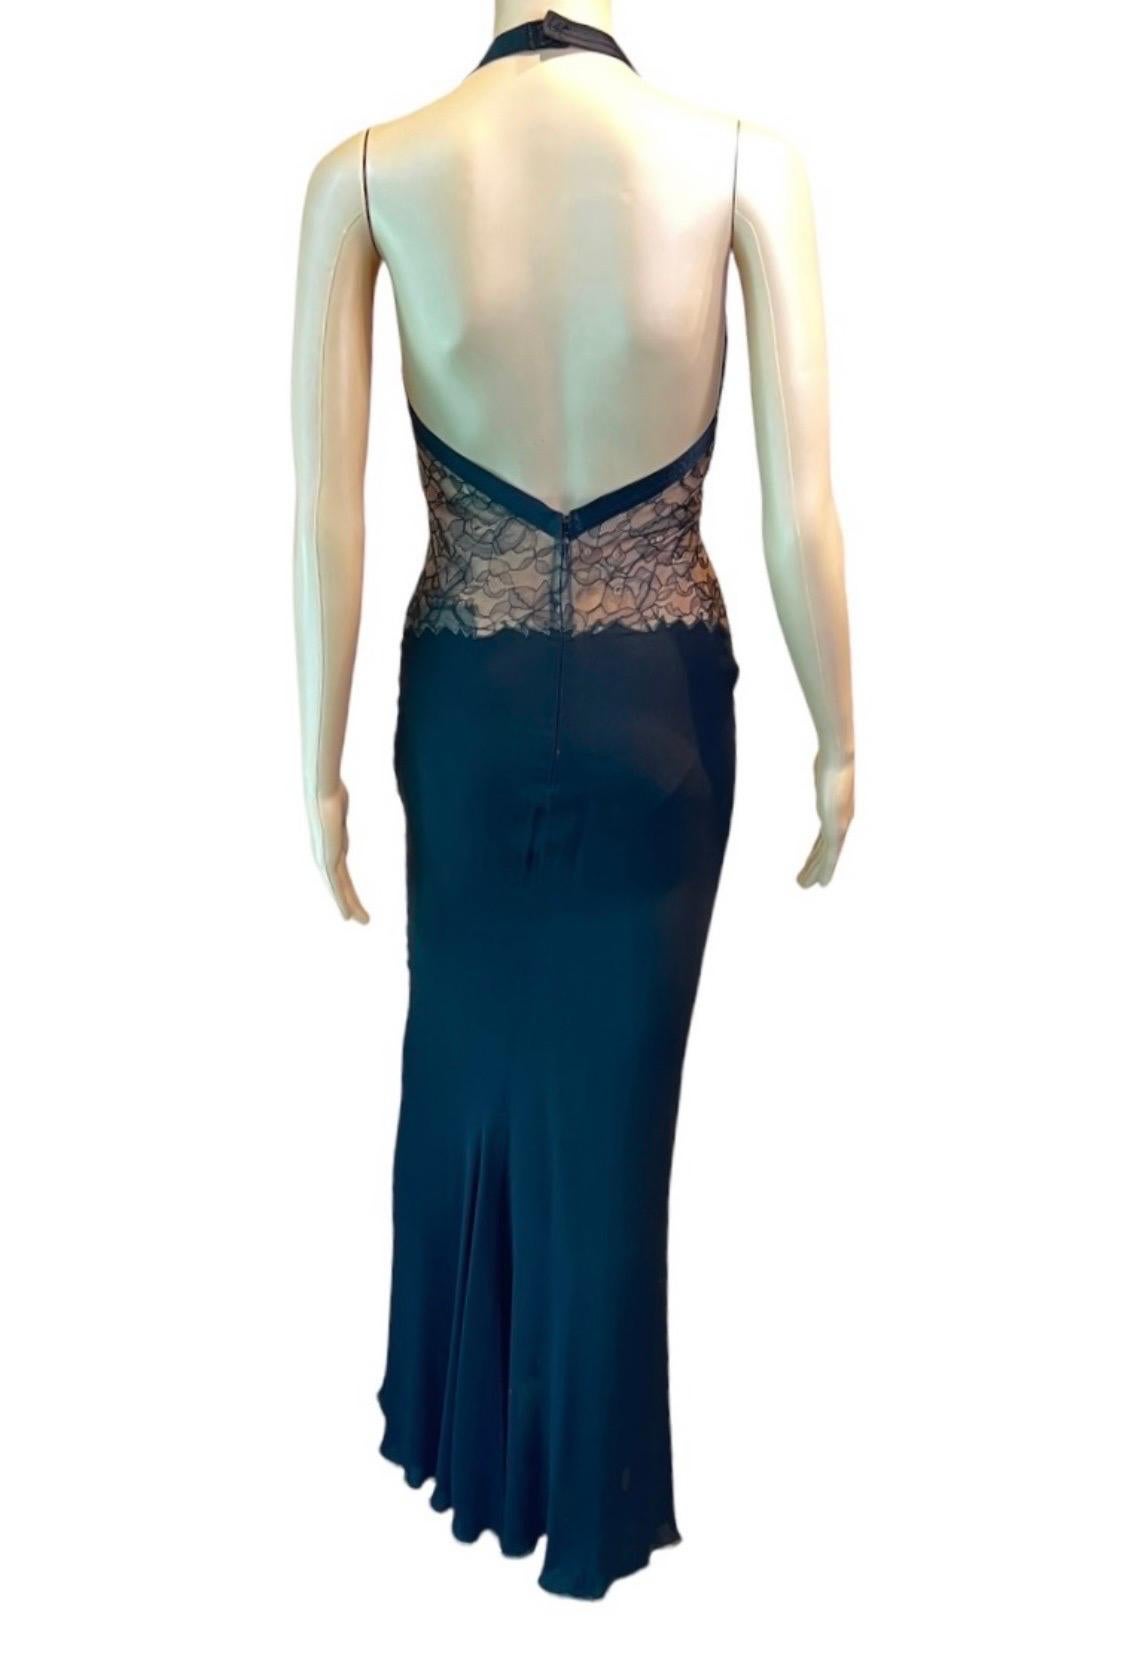 Women's or Men's Gianni Versace S/S 1992 Bustier Lace Bra Sheer Panels Slit Evening Dress Gown For Sale